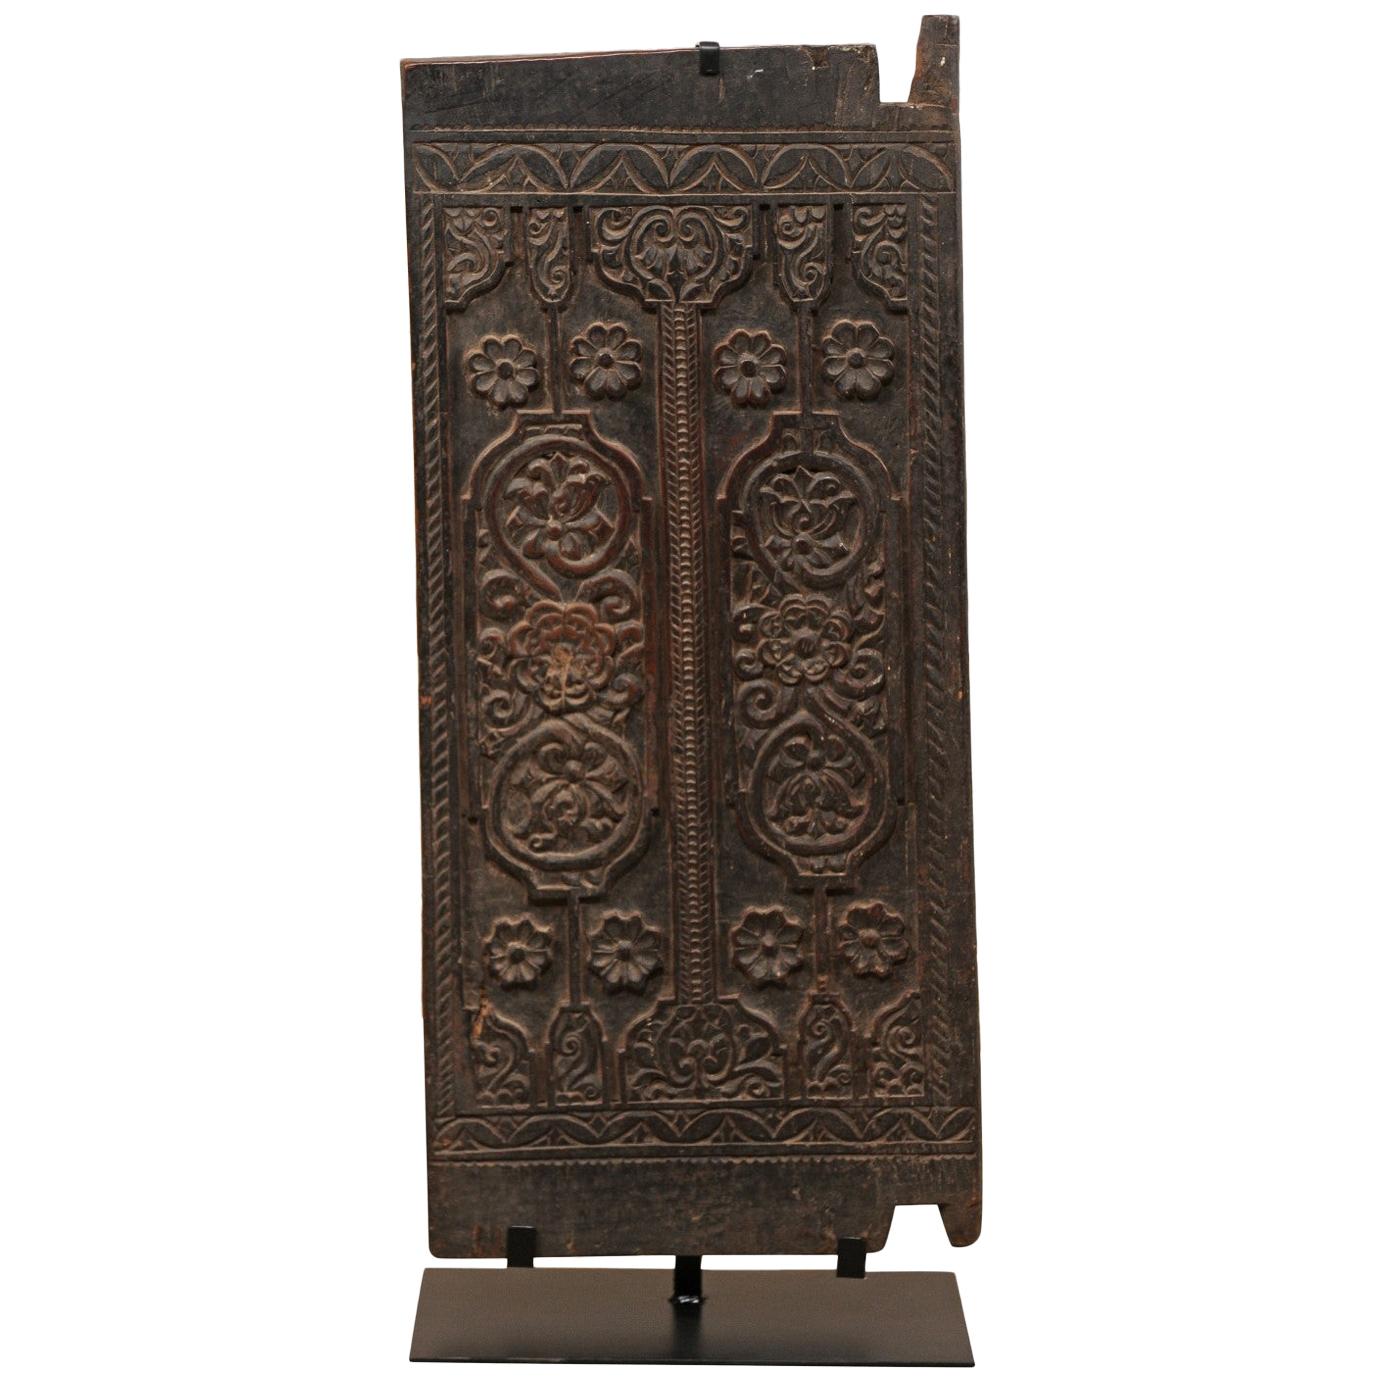 Balinese Floral-Carved Wood Rice Barn Door on Custom Base, Stands 4 Ft Tall 